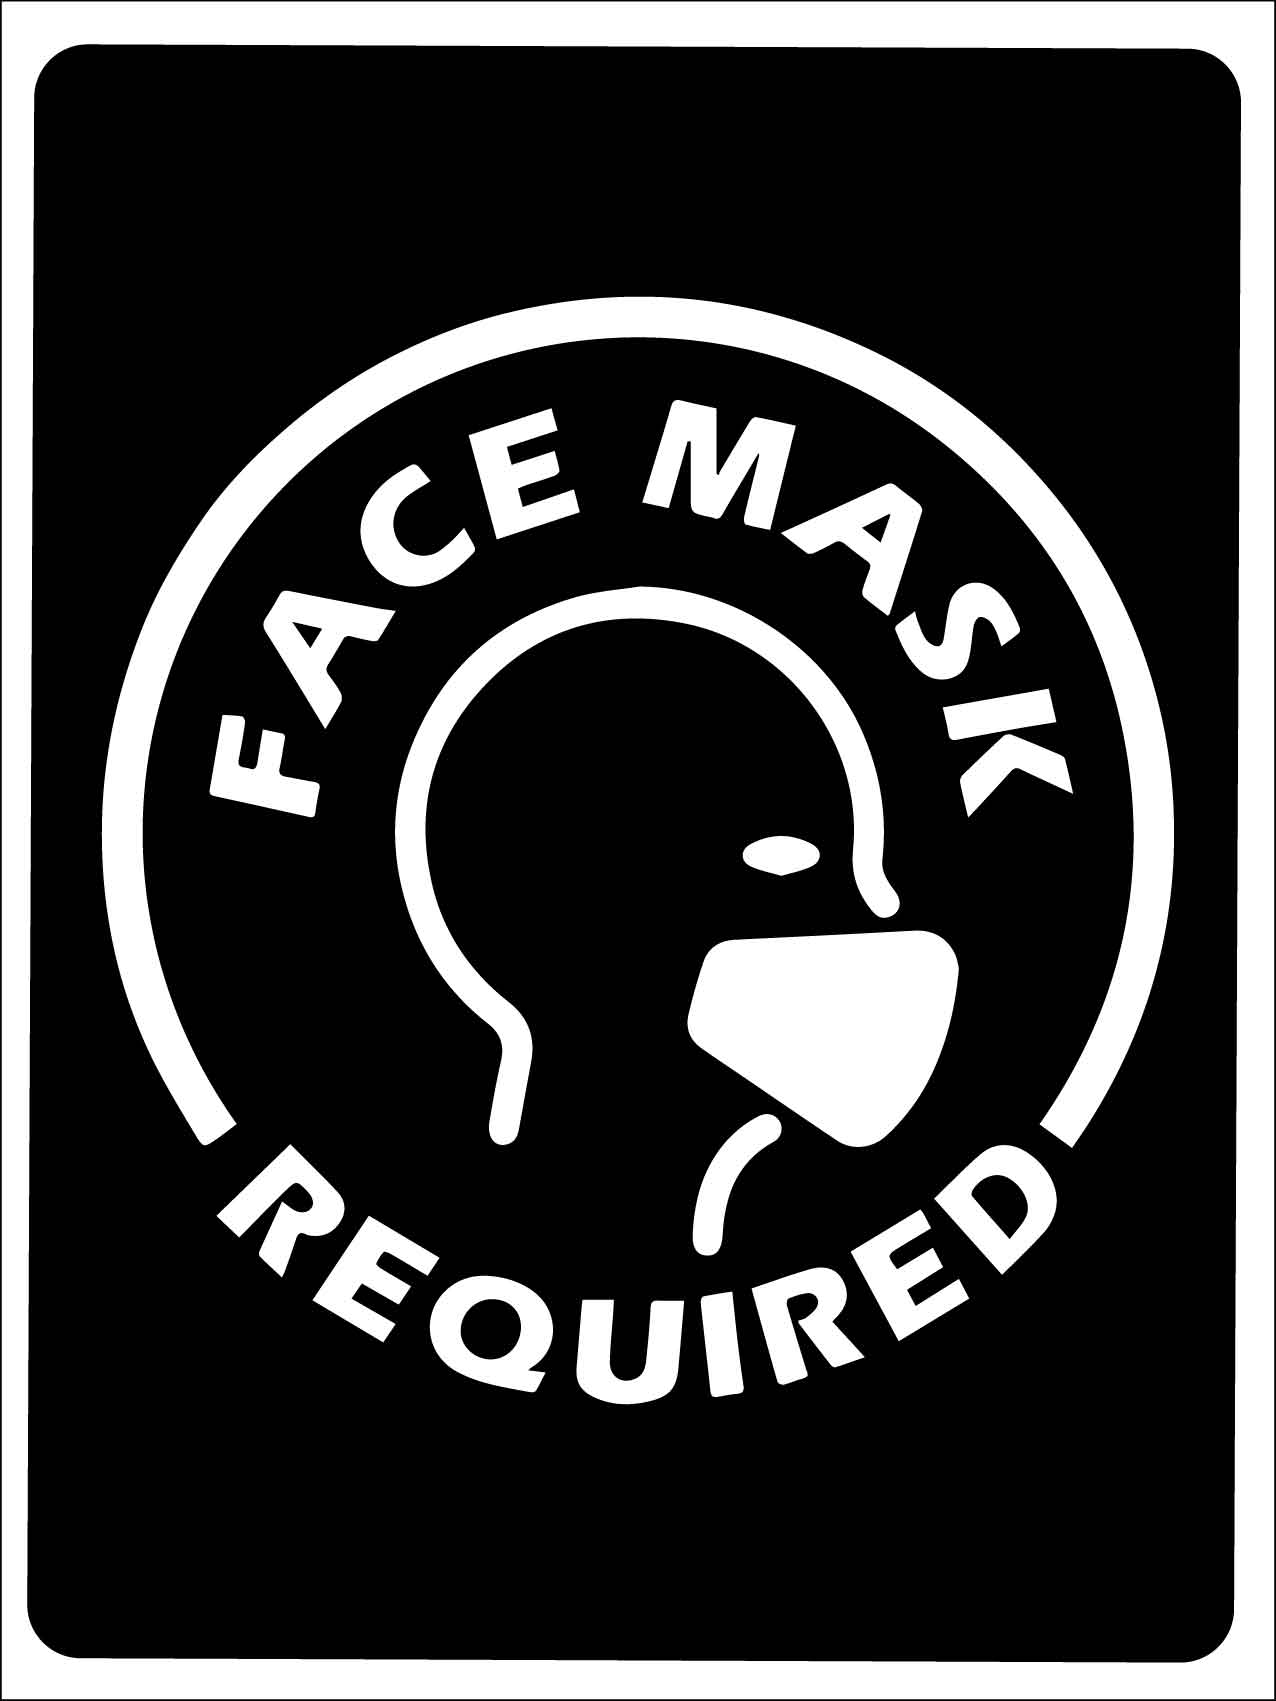 Face Mask Required Image Black Sign